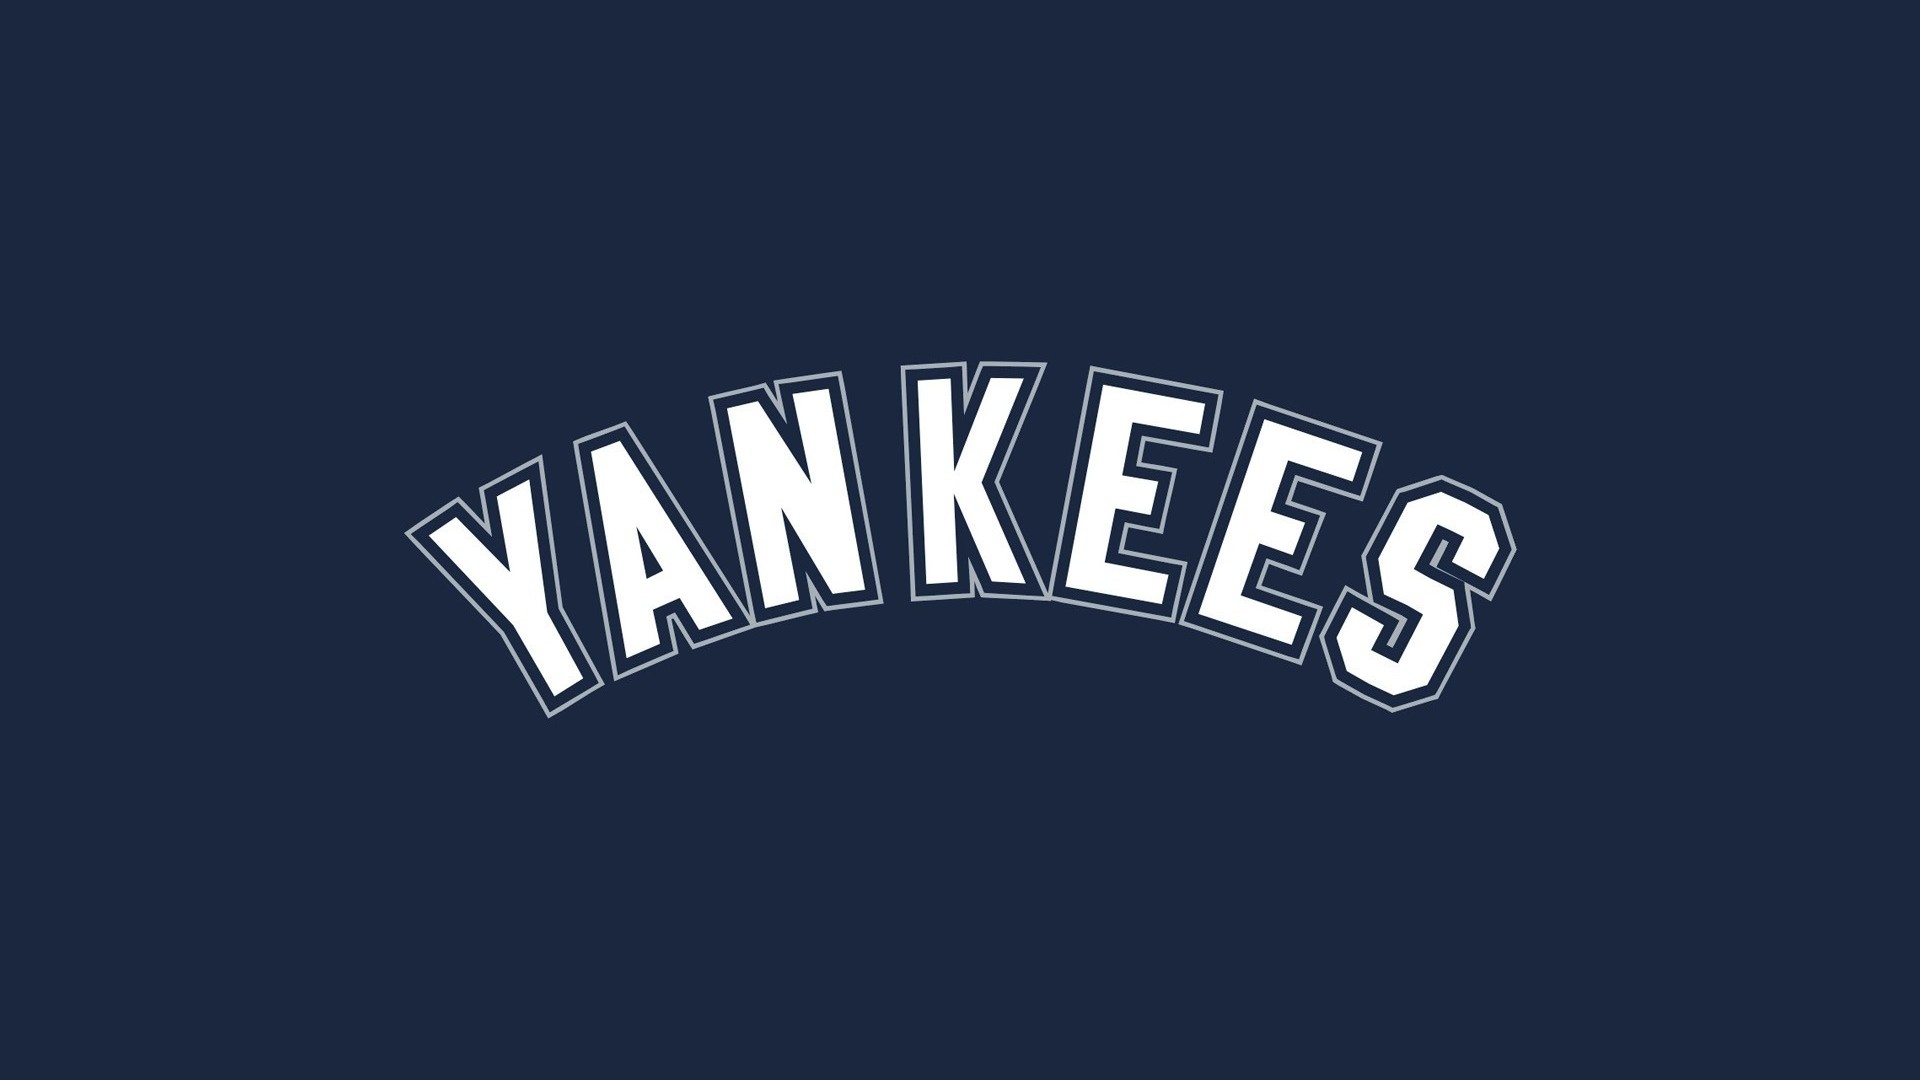 HD Backgrounds NY Yankees with high-resolution 1920x1080 pixel. You can use this wallpaper for Mac Desktop Wallpaper, Laptop Screensavers, Android Wallpapers, Tablet or iPhone Home Screen and another mobile phone device